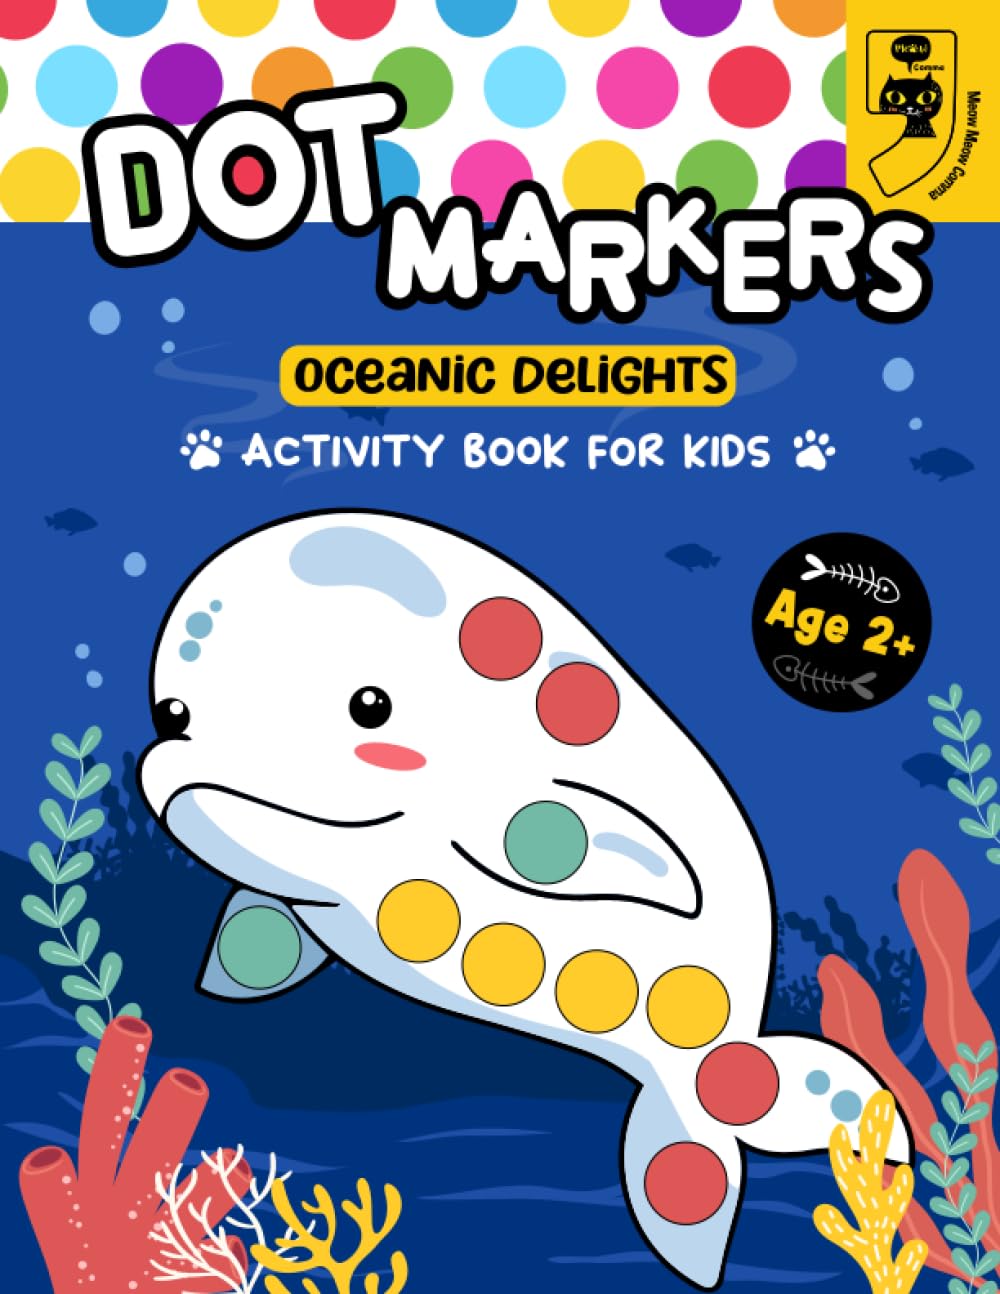 Dot Markers Oceanic Delights Activity Book for Kids: Dotting Fun Coloring Book for Little Artists (Dot Markers Activity Book for Toddlers and Preschoolers)